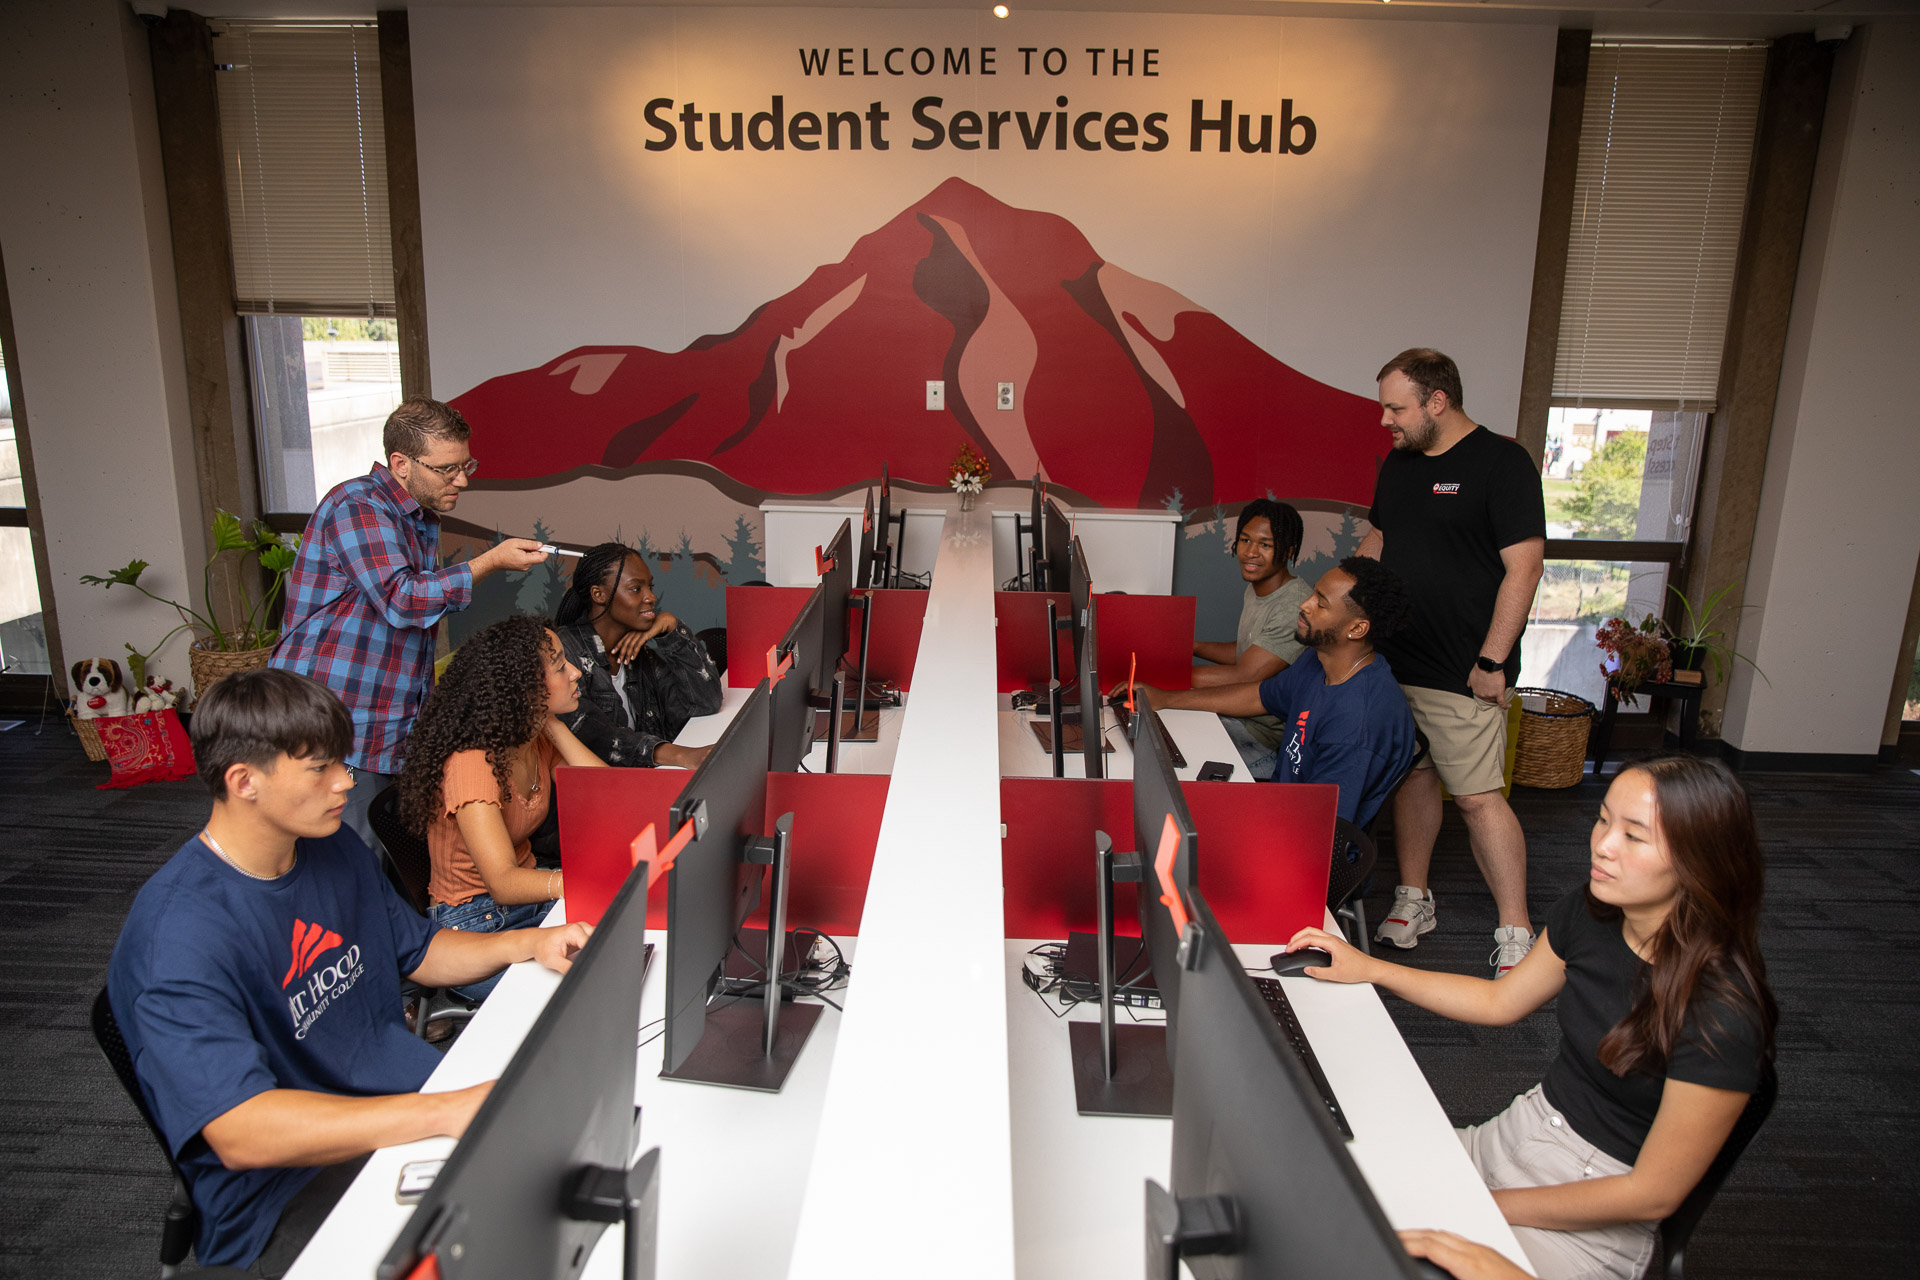 Students in student services hub